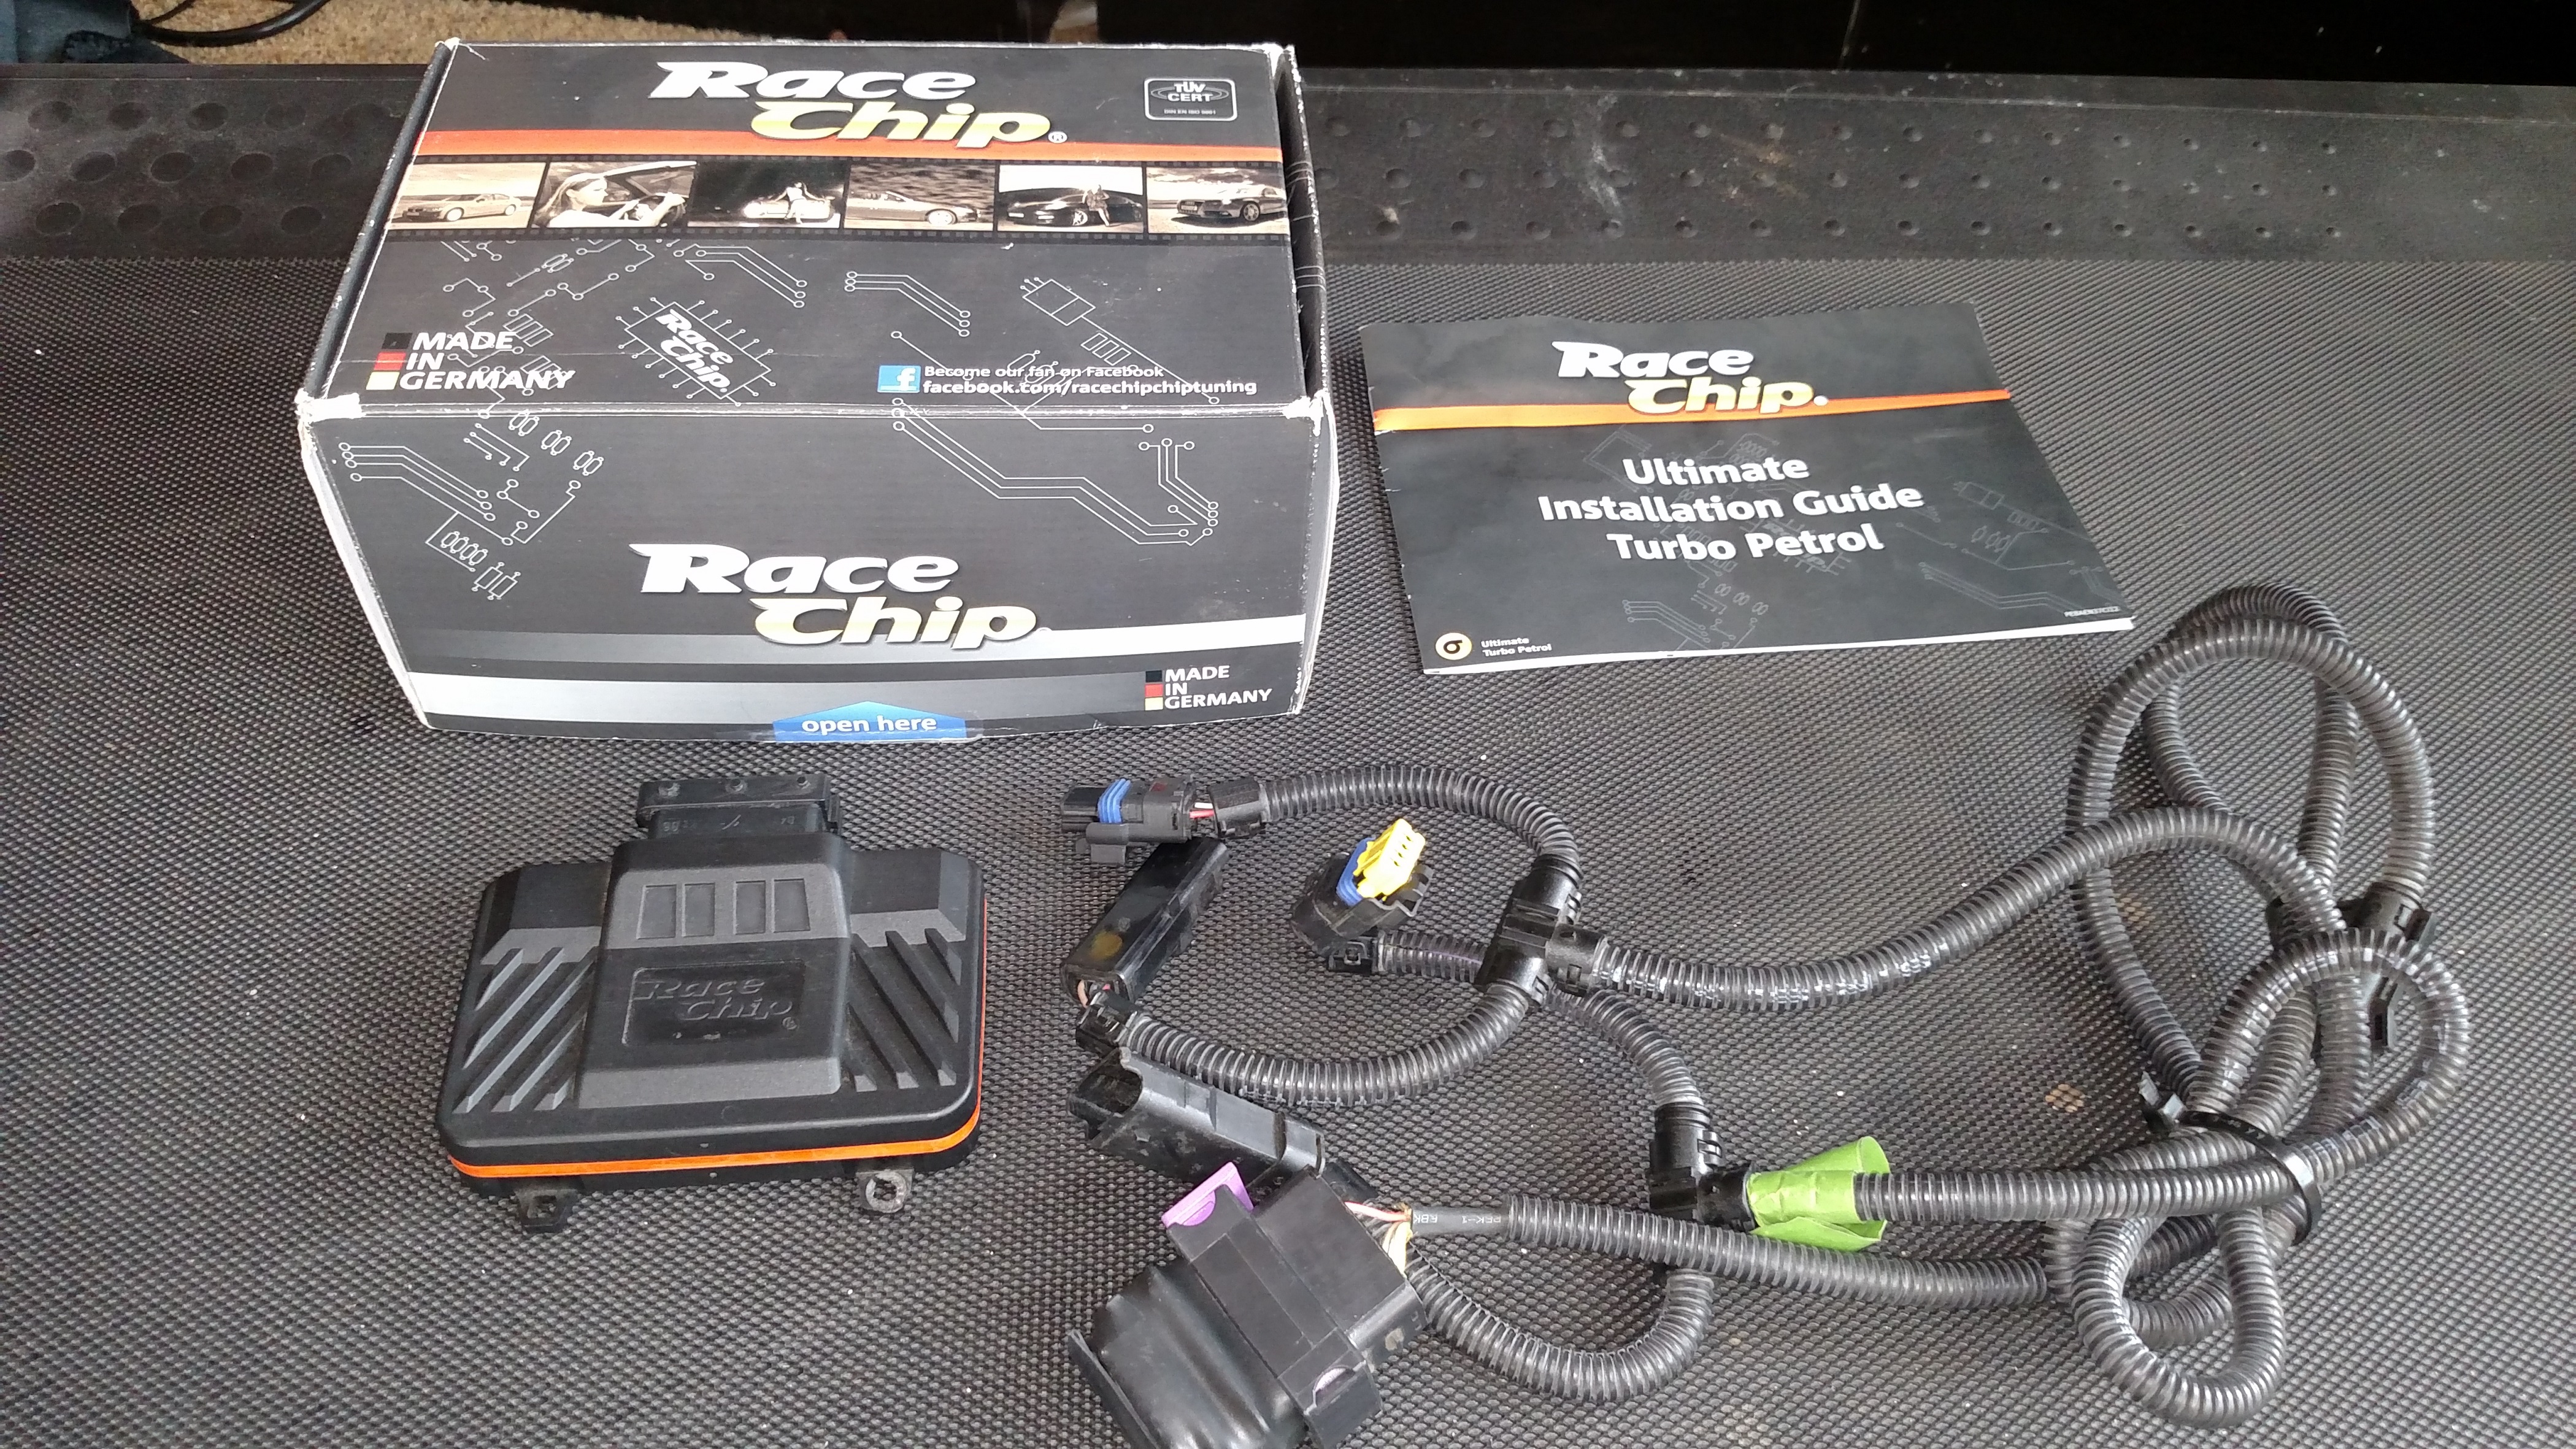 FS:: Racechip Ultimate for sale $350.00 - North American Motoring